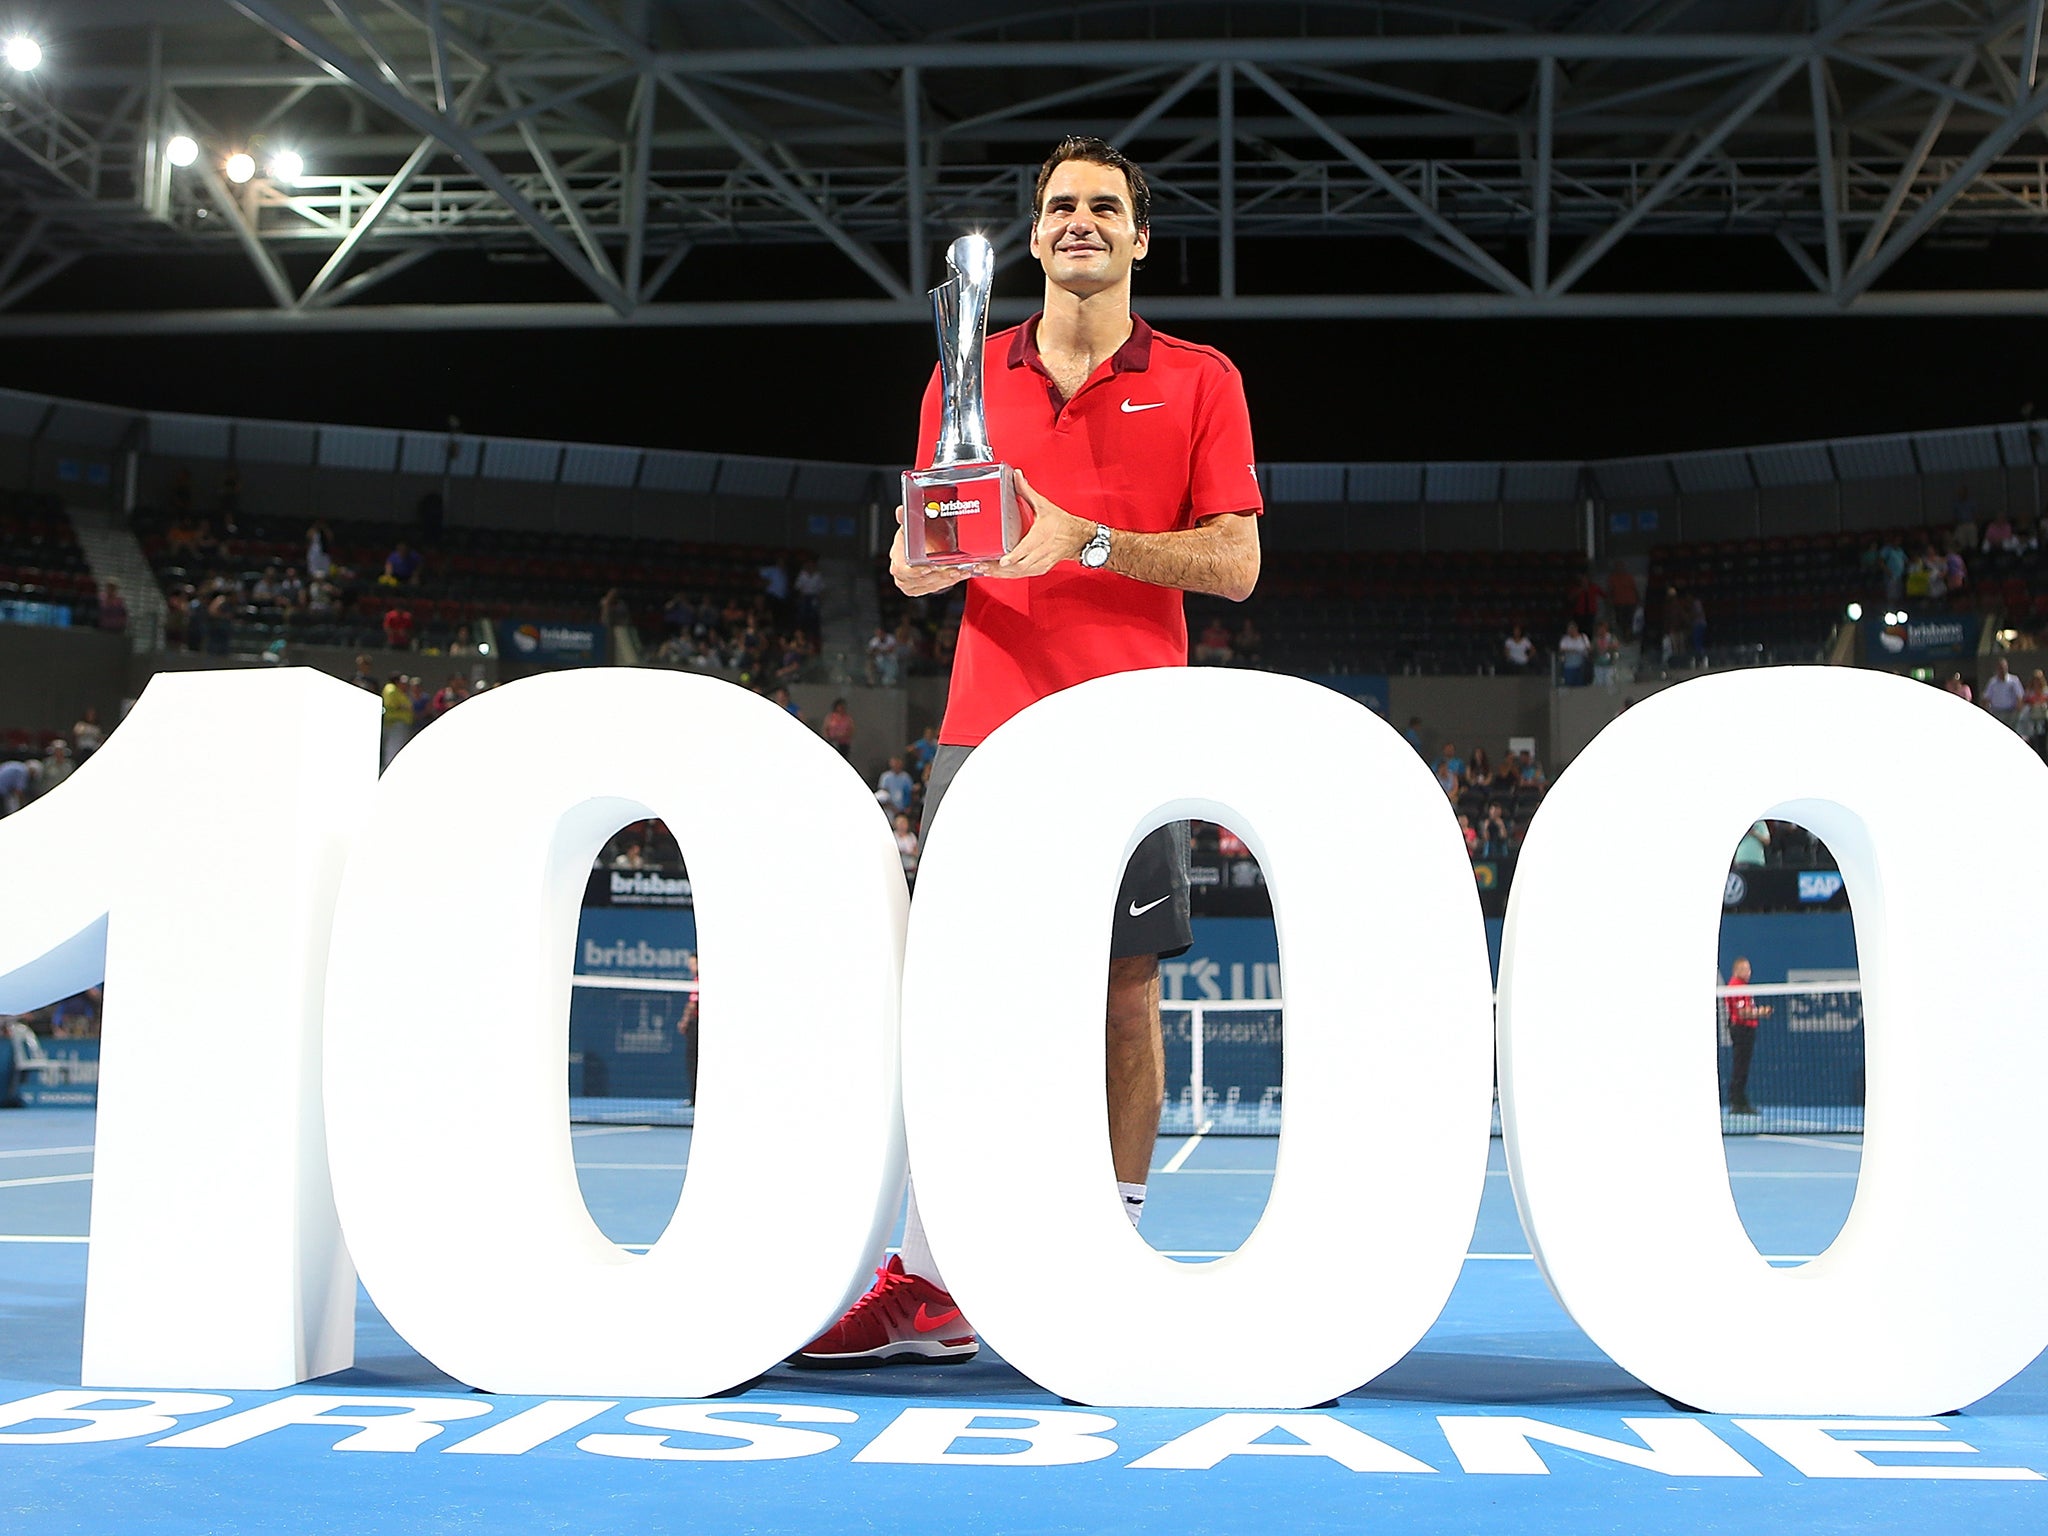 Roger Federer celebrates after claiming his 1,000th career win